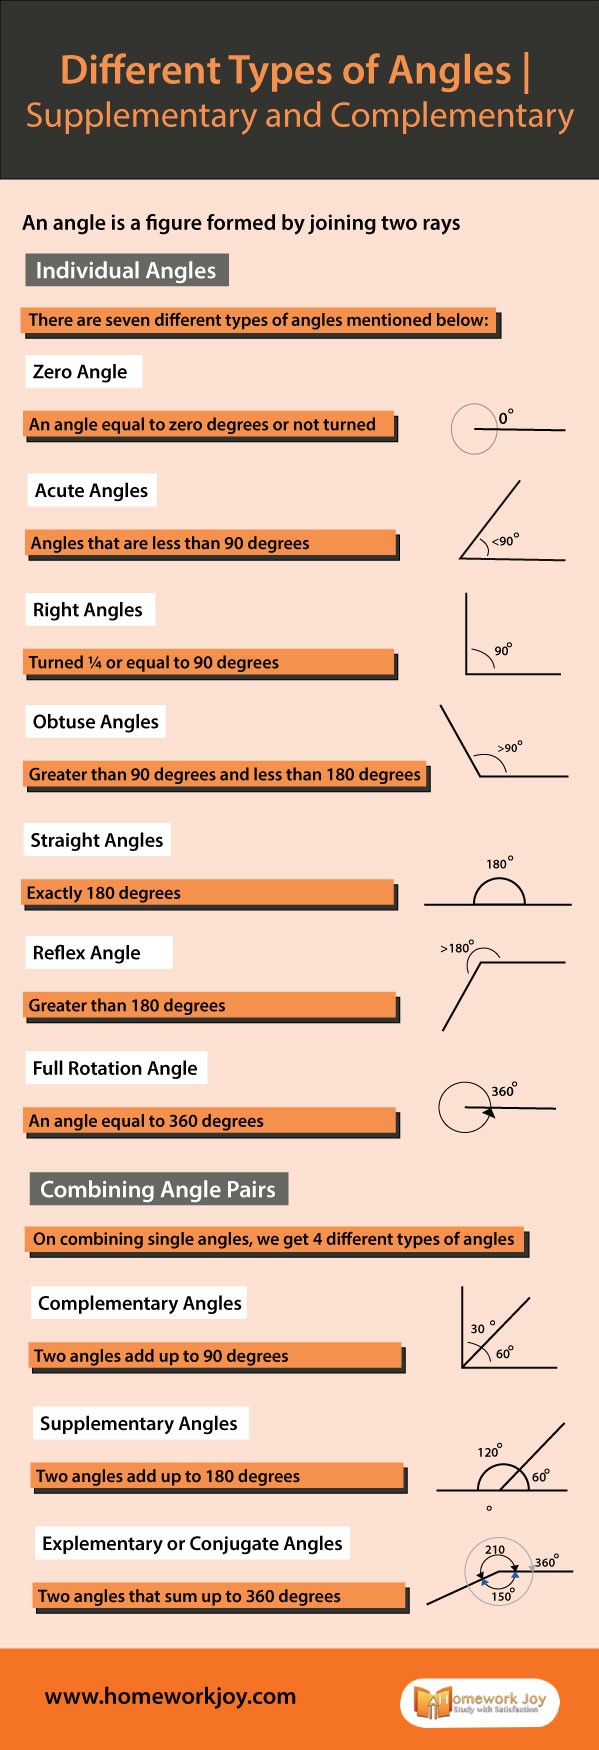 Different Types of Angles Supplementary and Complementary